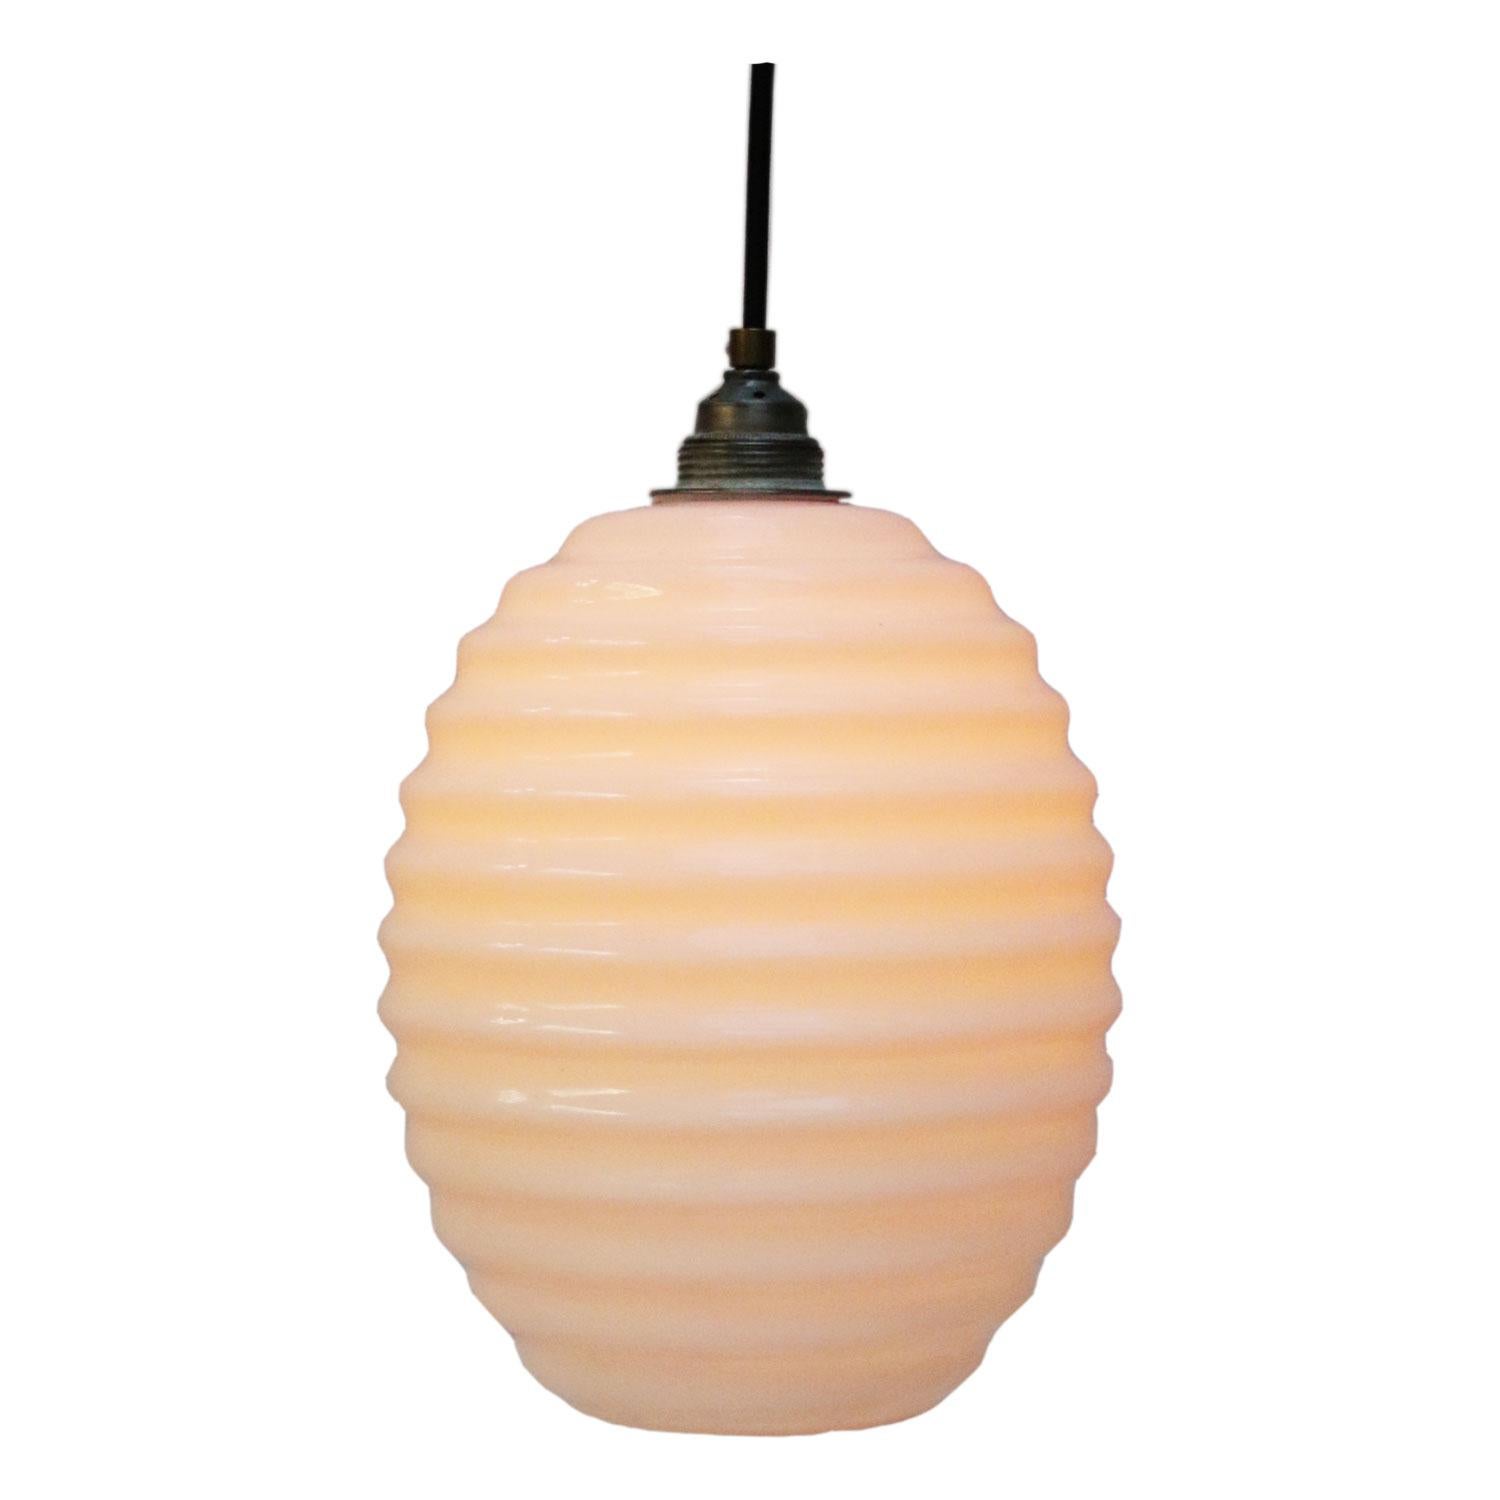 German Opaline glass industrial Bauhaus pendant. 

Weight 1.0 kg / 2.2 lb

Priced per individual item. All lamps have been made suitable by international standards for incandescent light bulbs, energy-efficient and LED bulbs. E26/E27 bulb holders